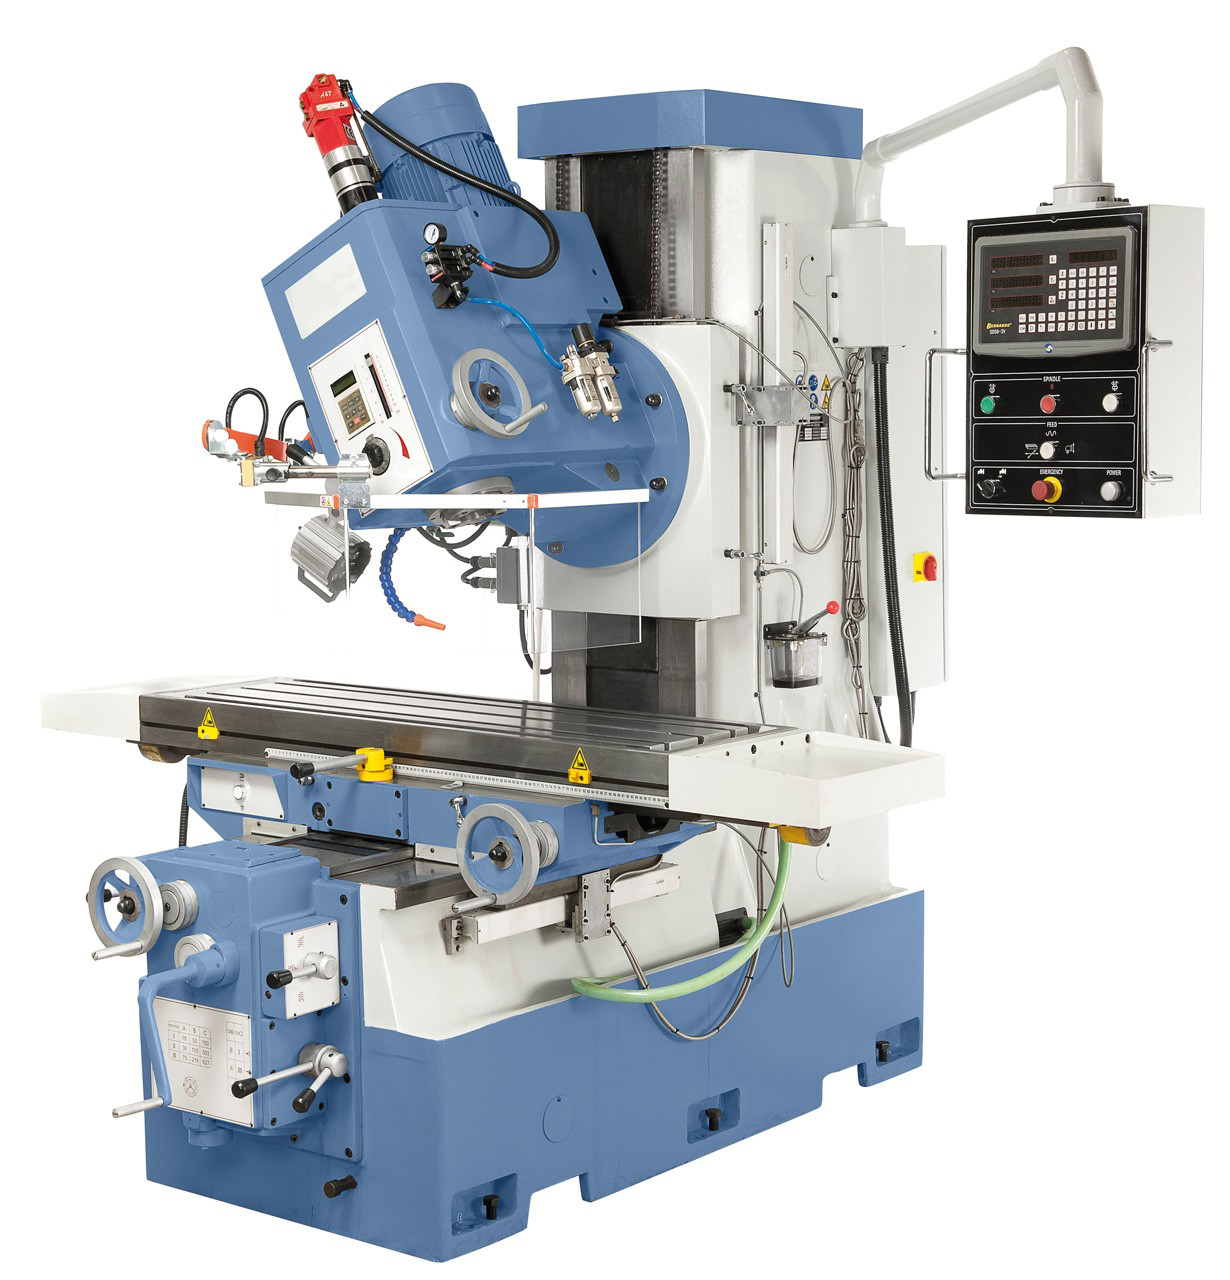 X7140 Bed Type Vertical Universal Milling Machine